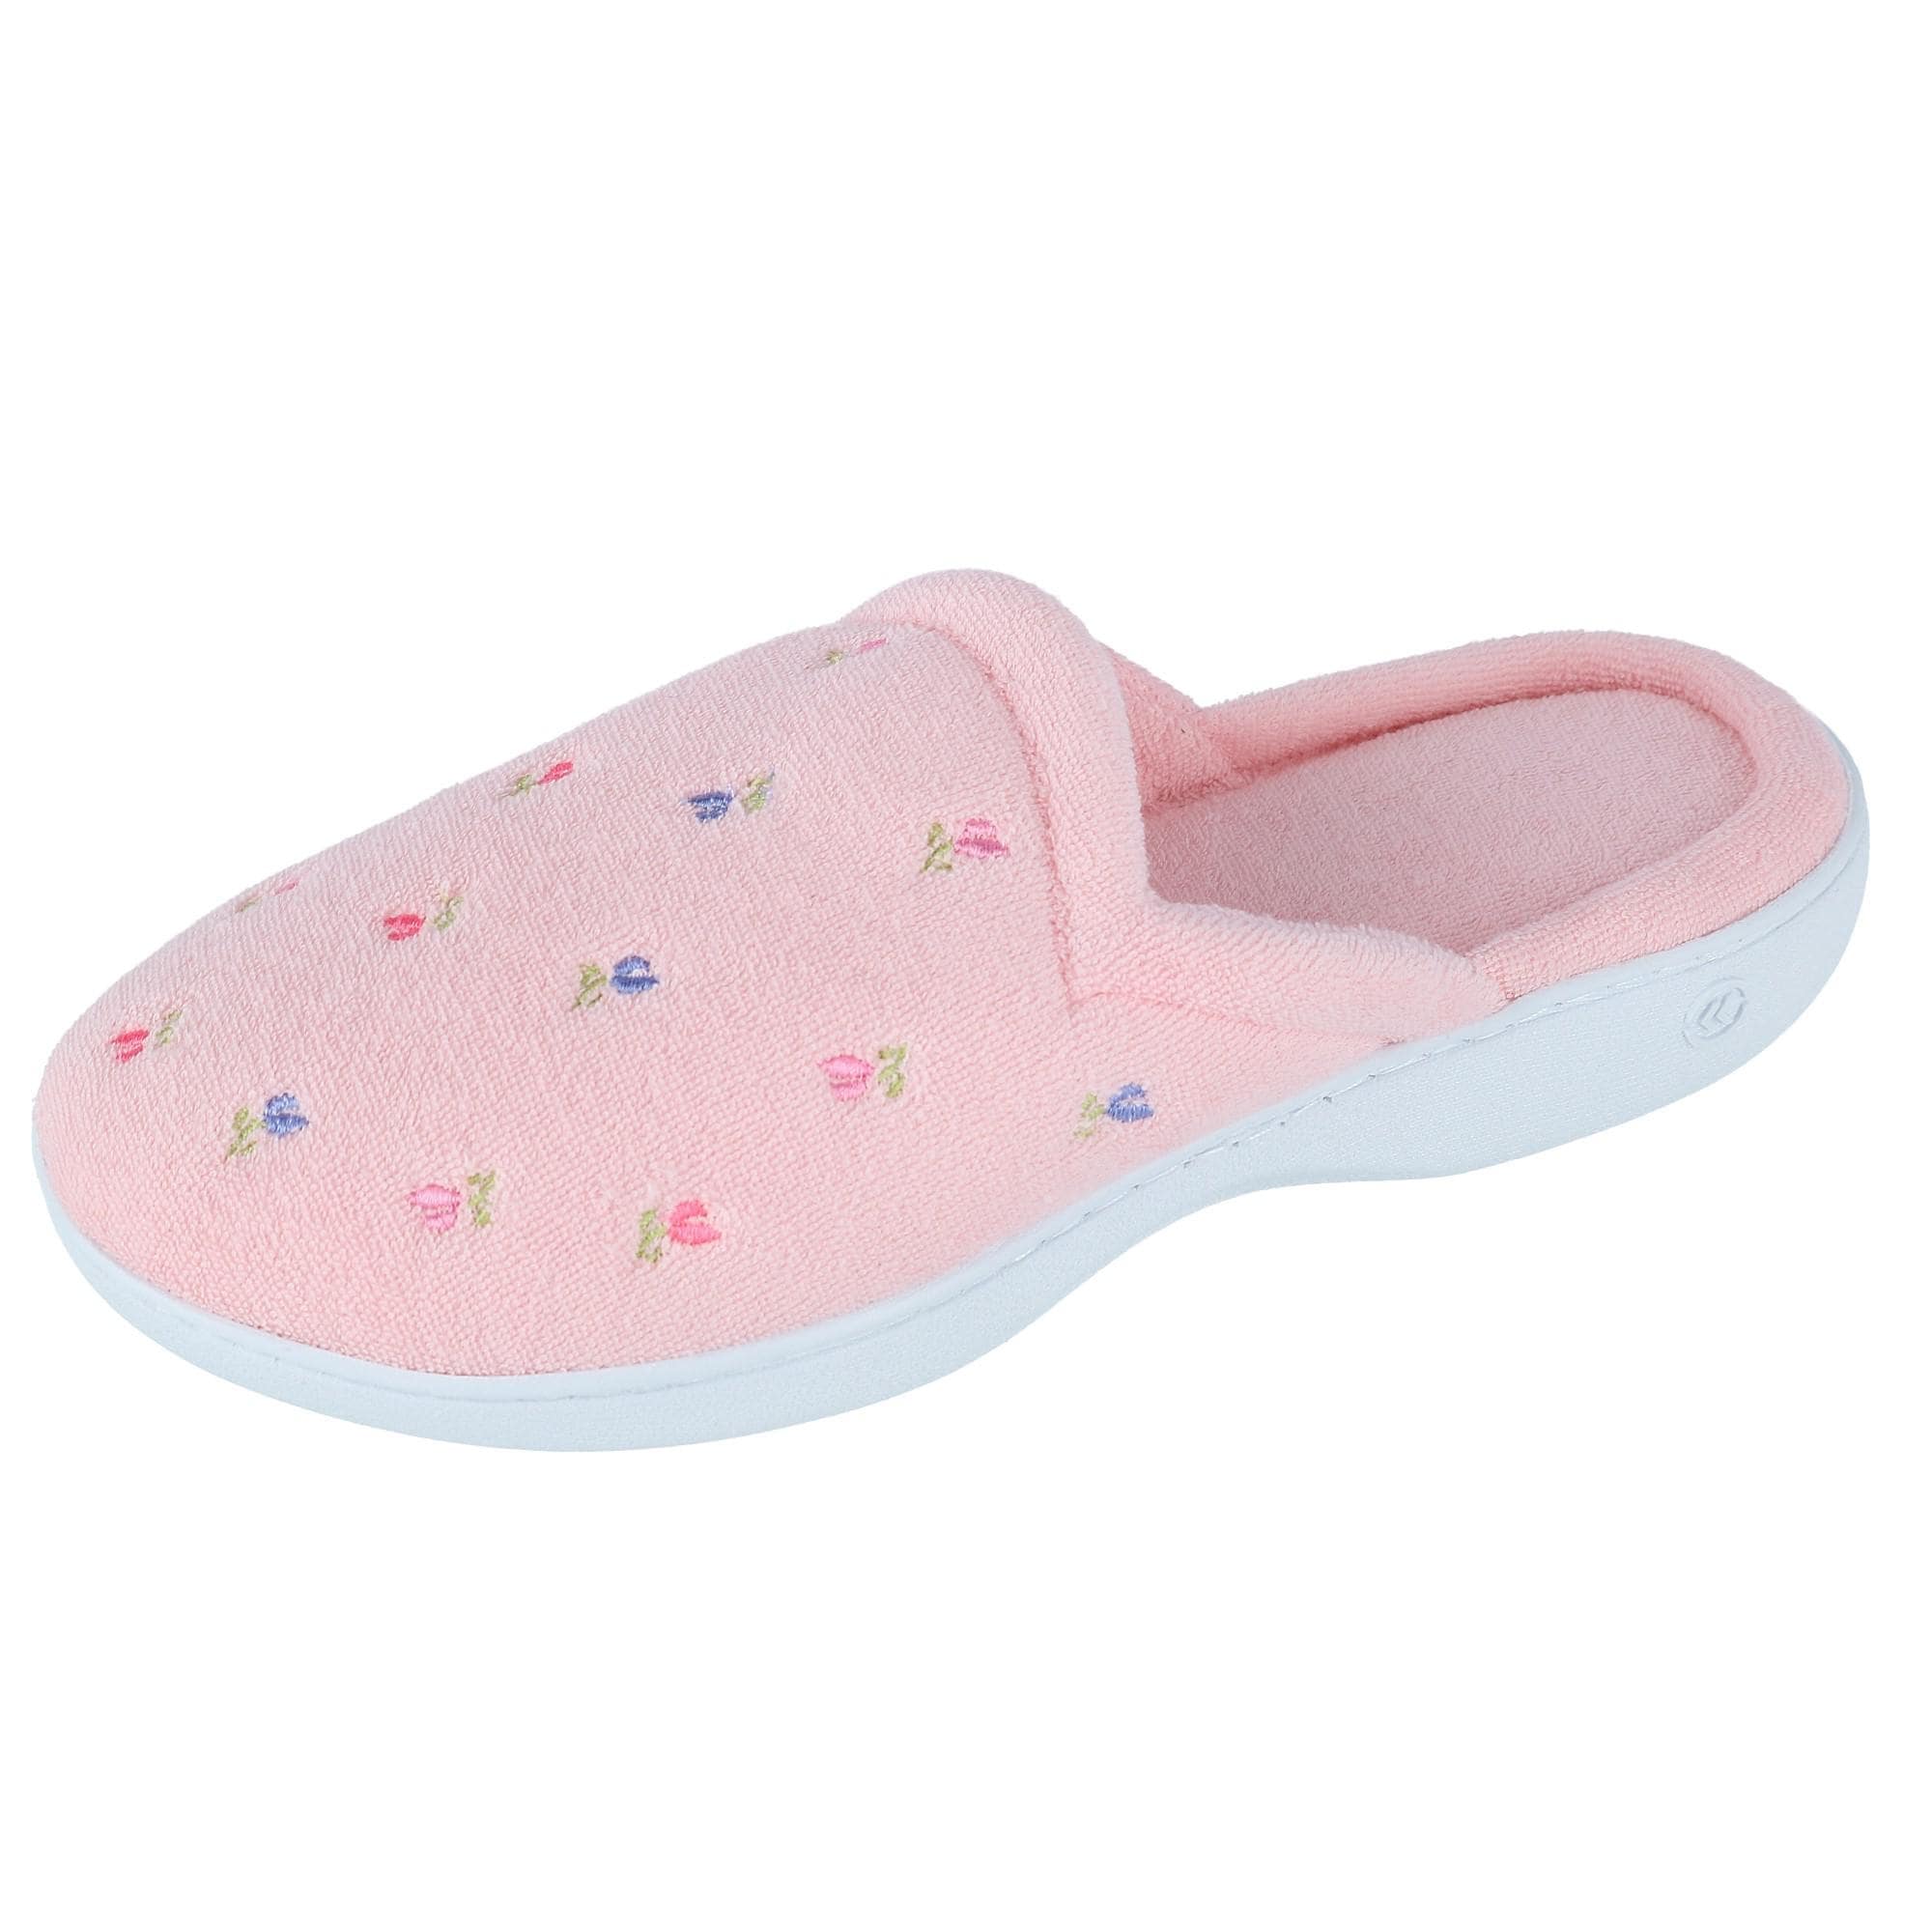 women's embroidered slippers